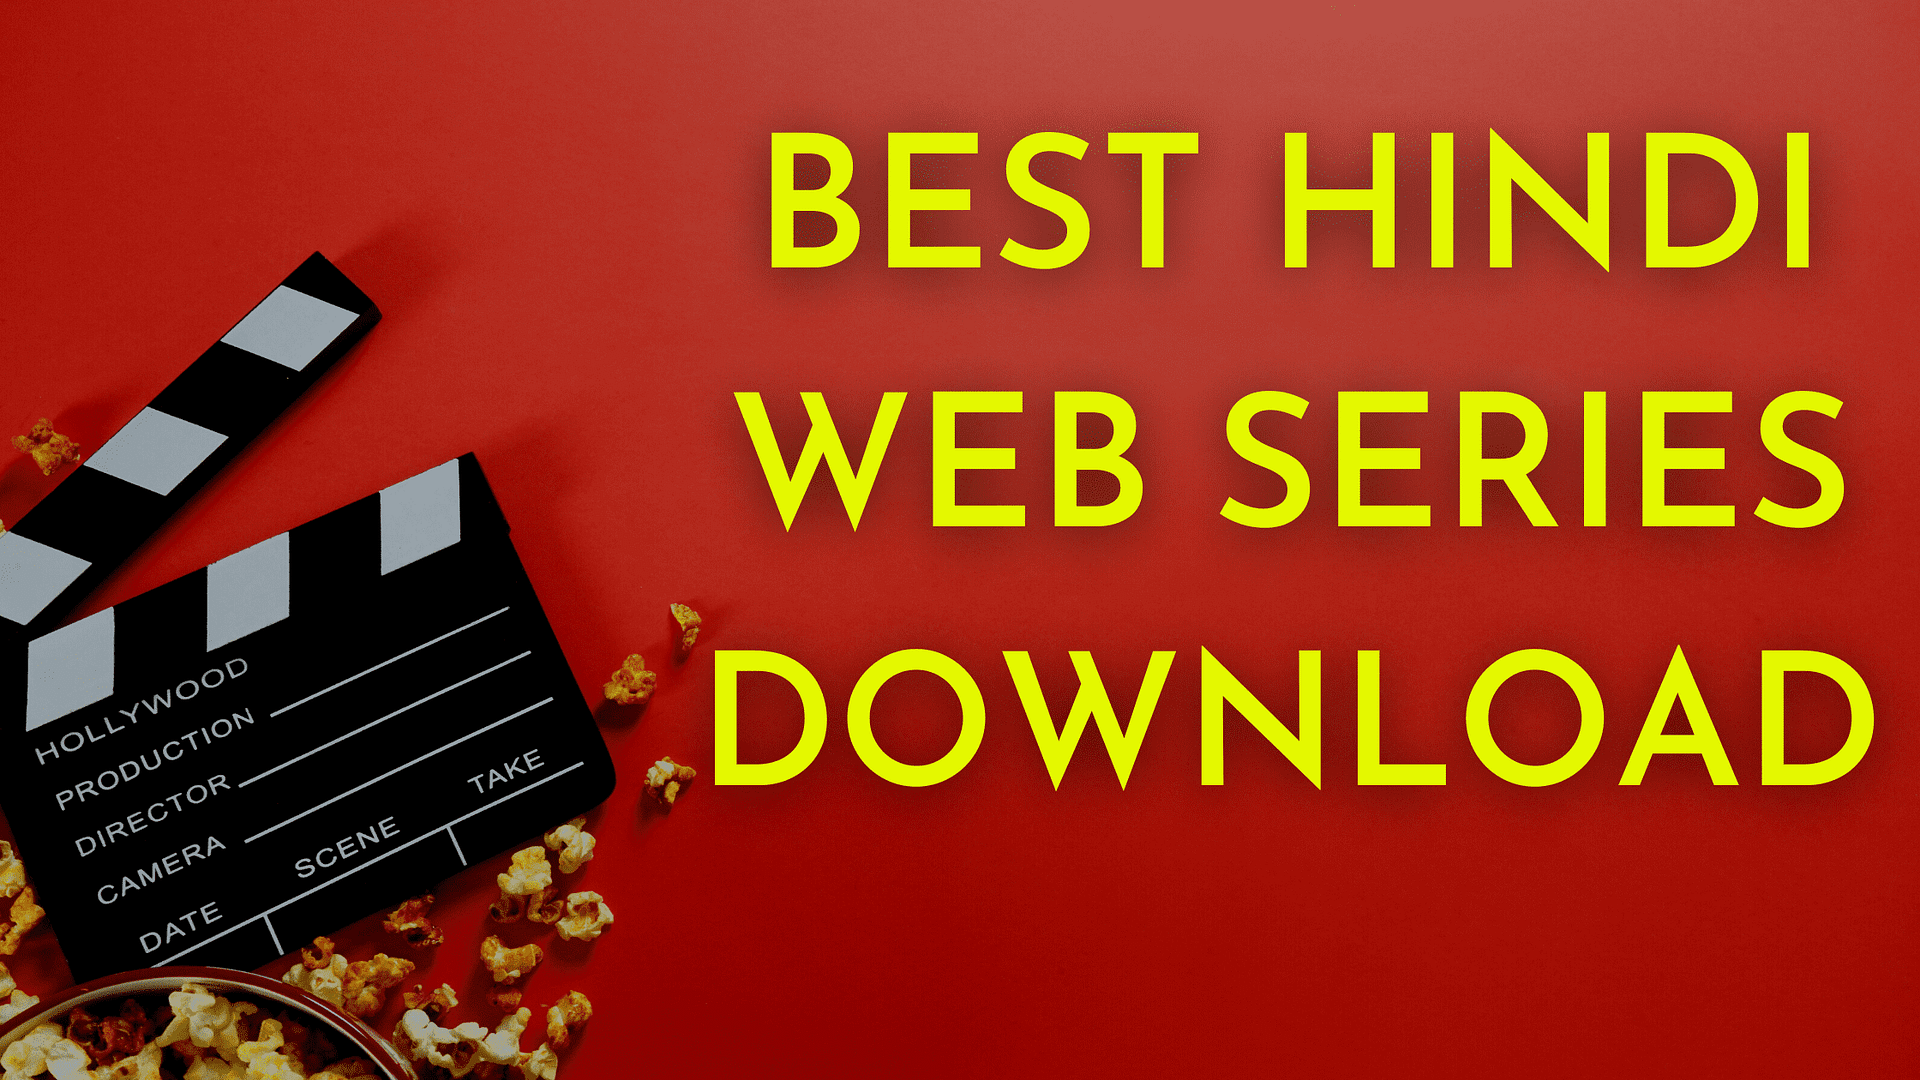 You are currently viewing Best hindi web series download